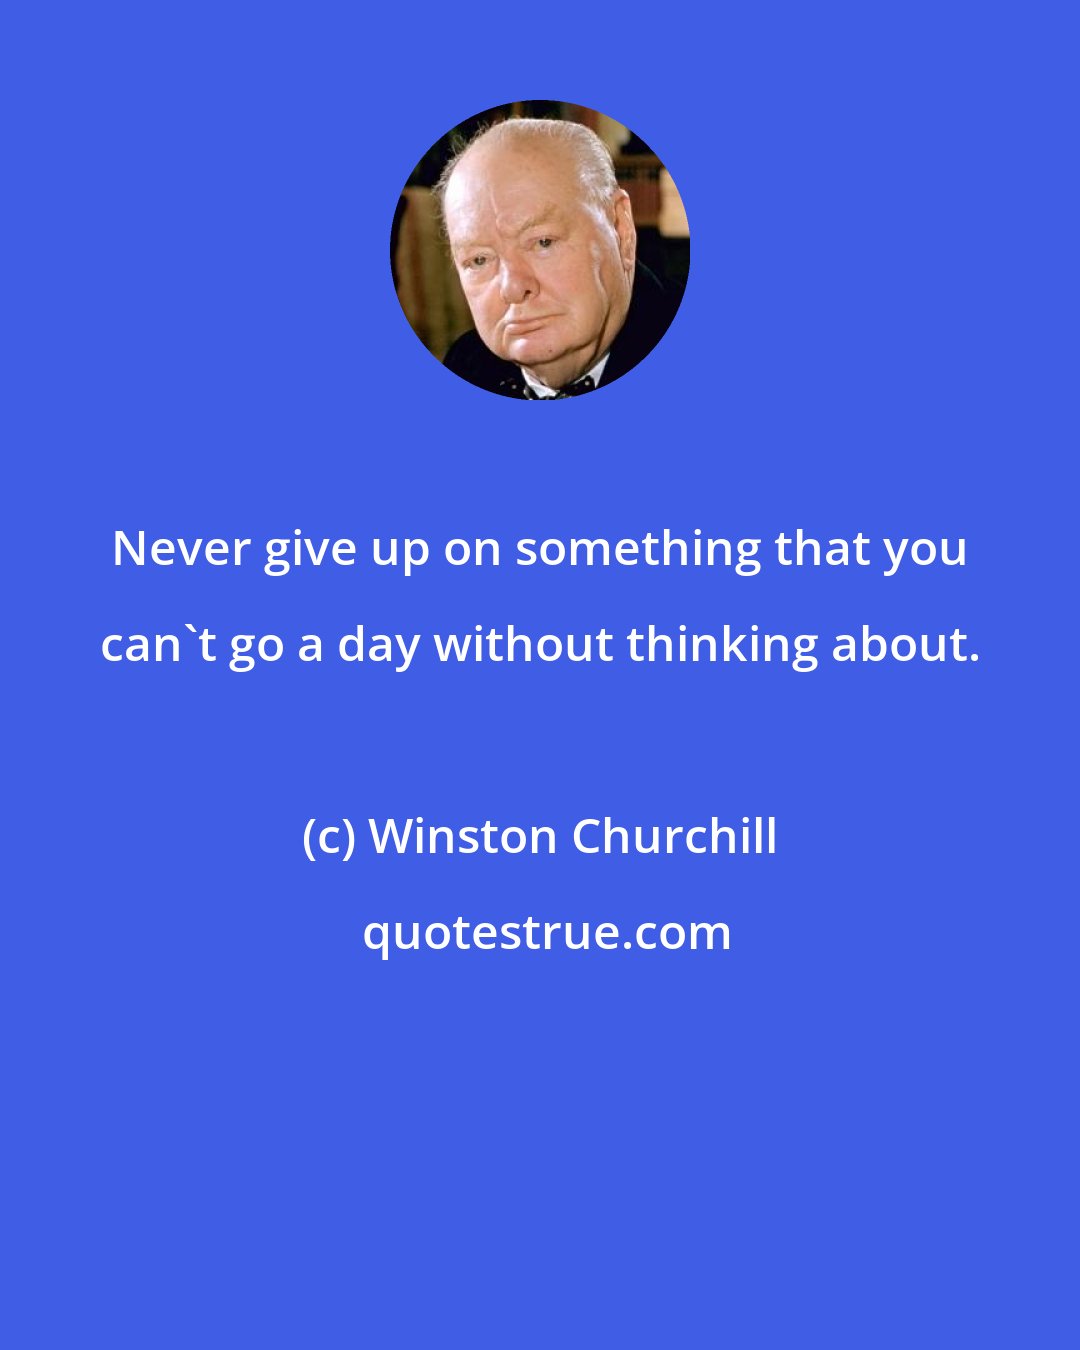 Winston Churchill: Never give up on something that you can't go a day without thinking about.